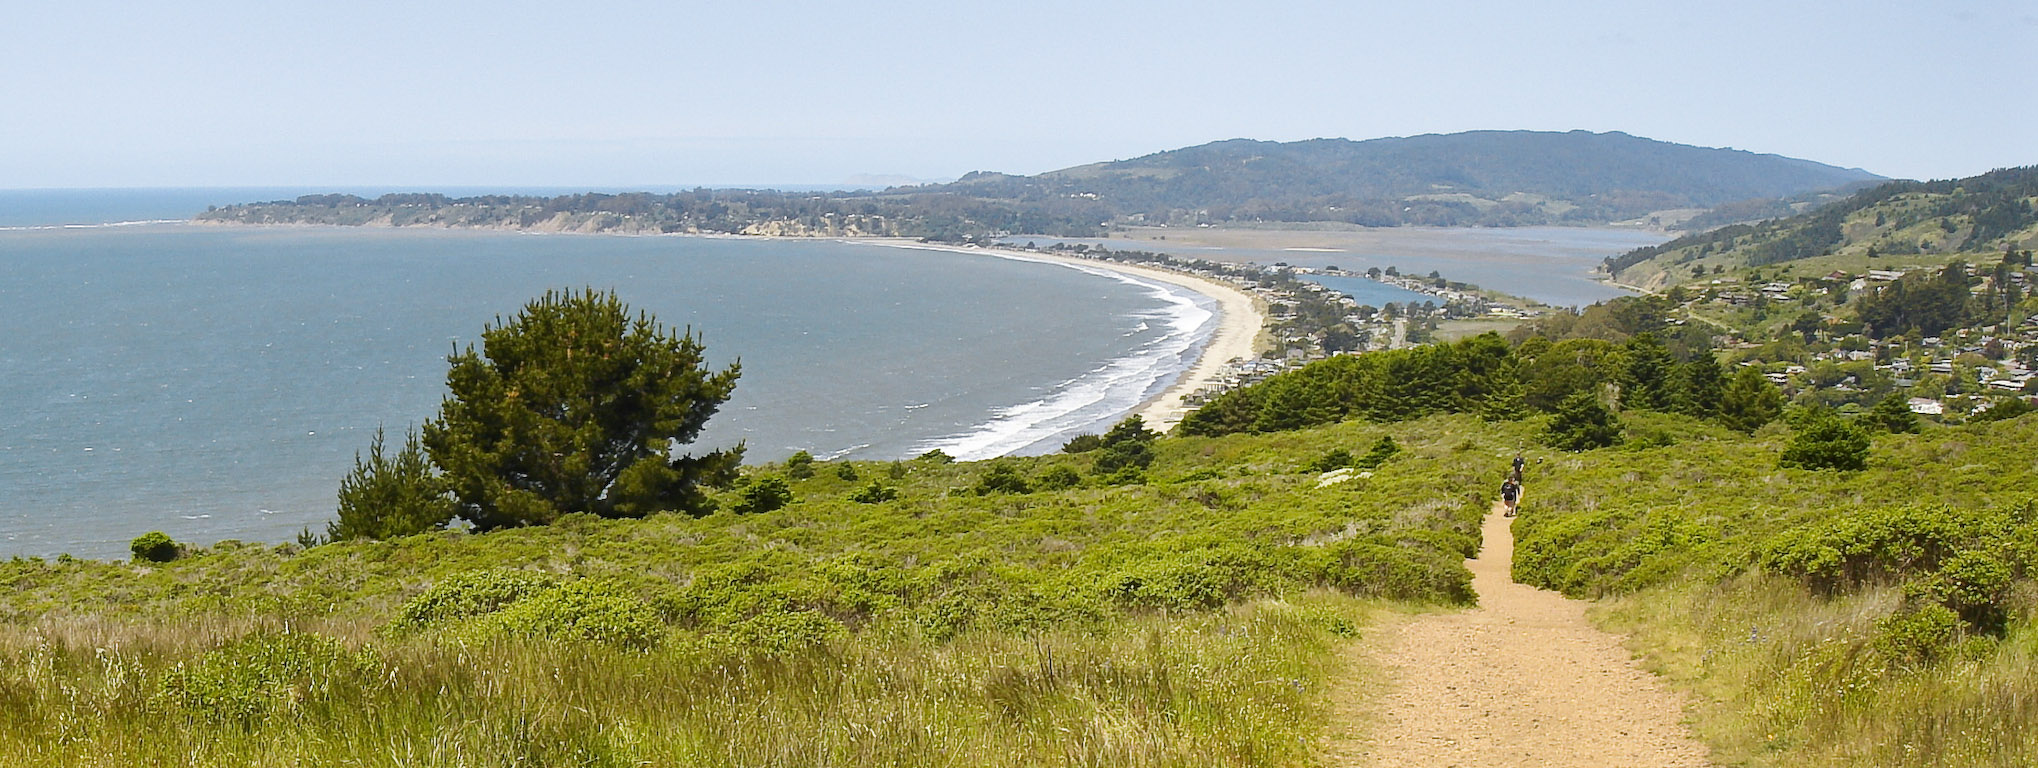 Best Hikes in NorCal